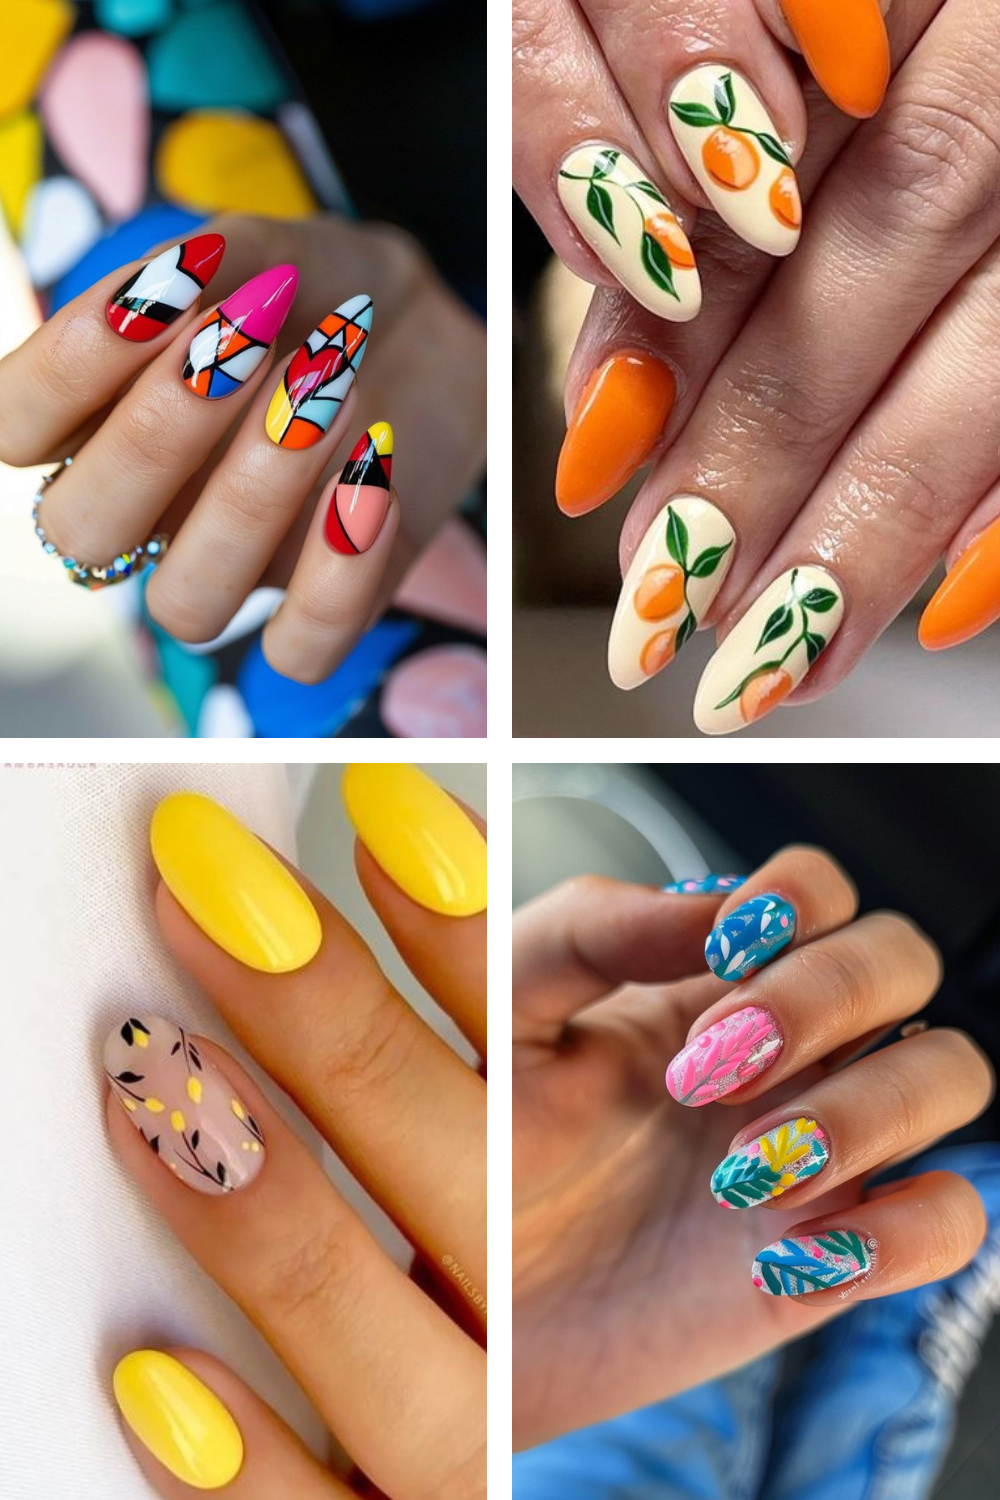 25 Amazing August Nails To Fall in Love With this Season!